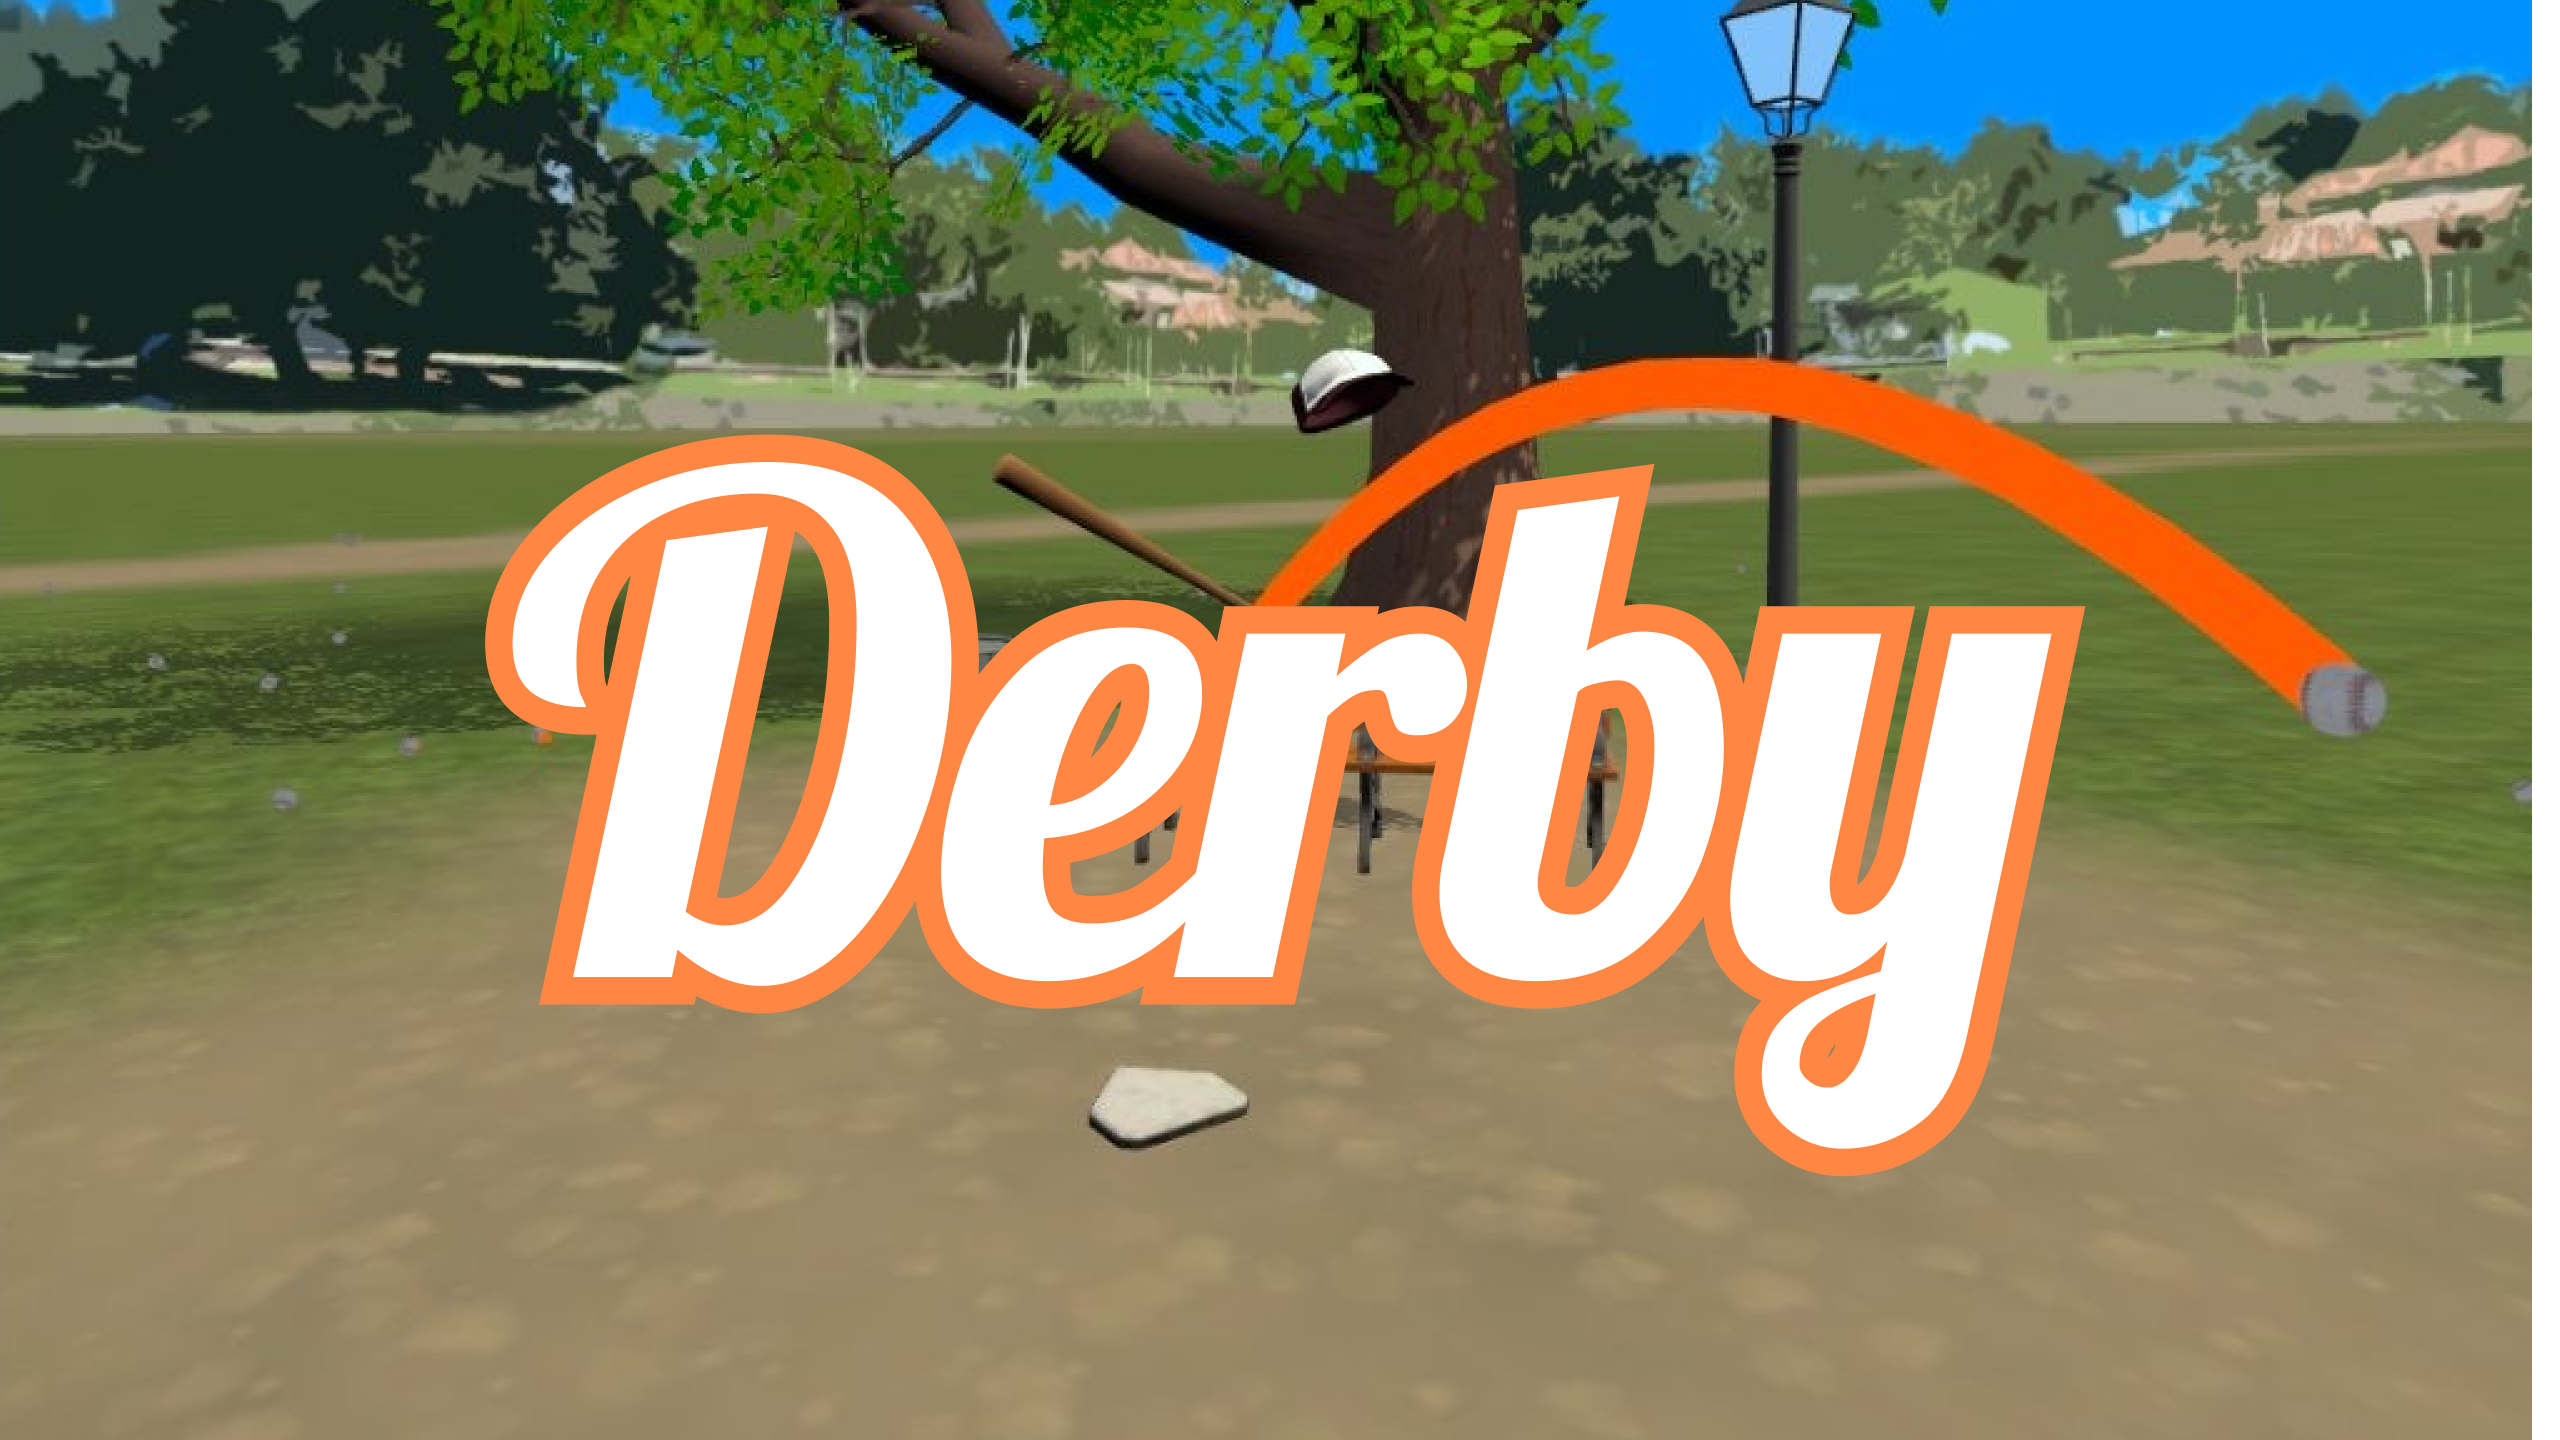 MLB Home Run Derby VR lets you launch dingers from your house